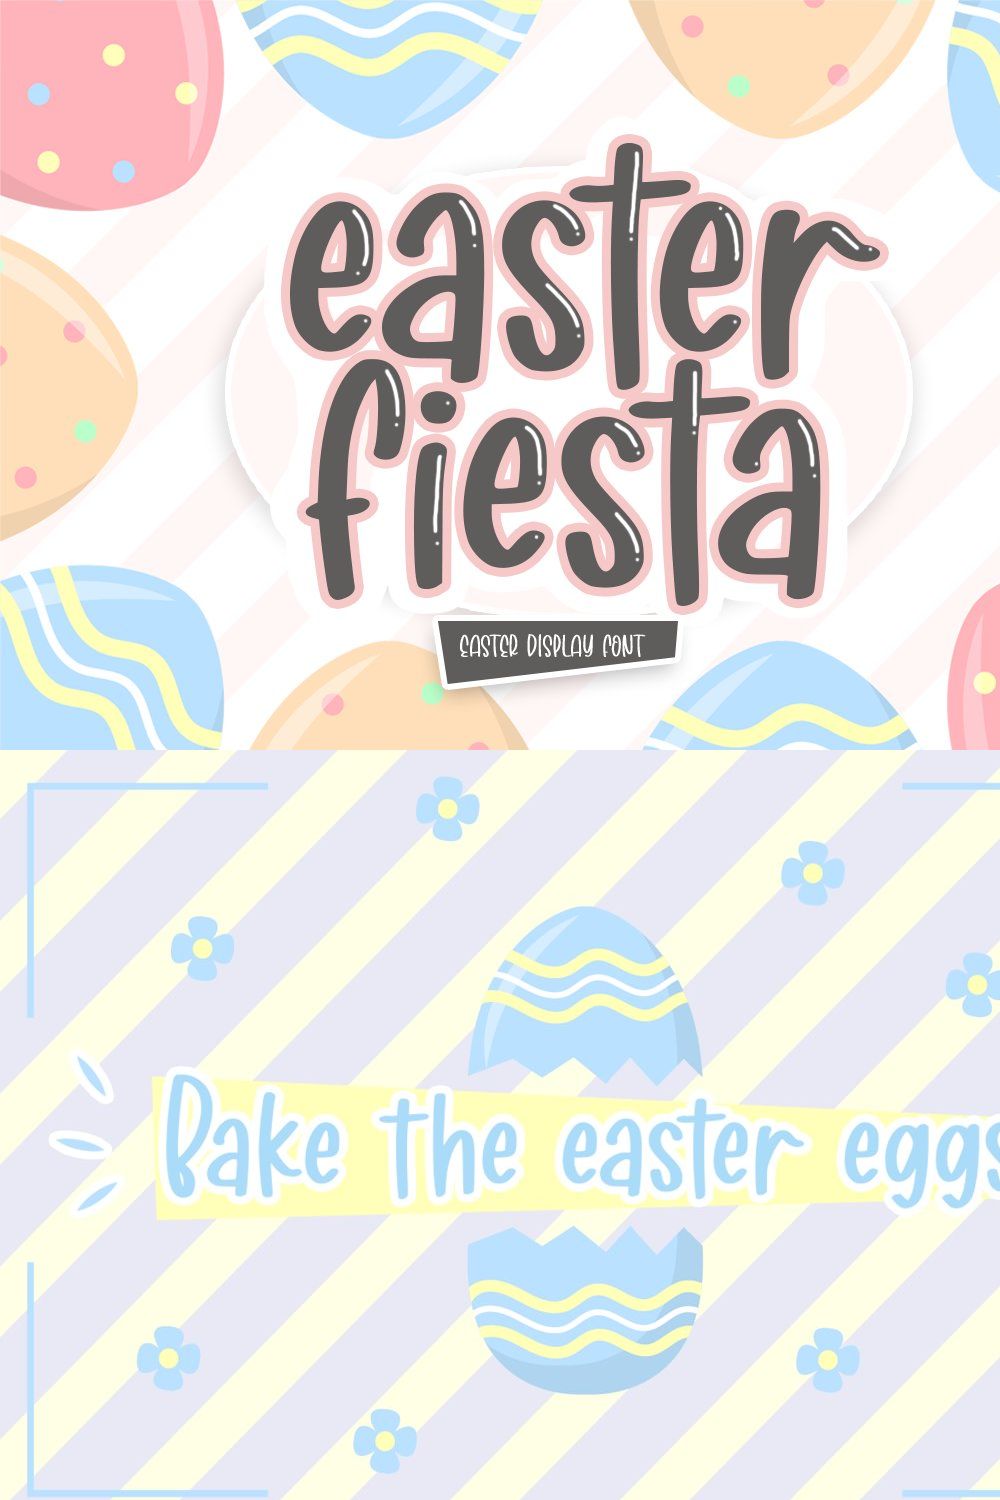 Easter Fiesta pinterest preview image.